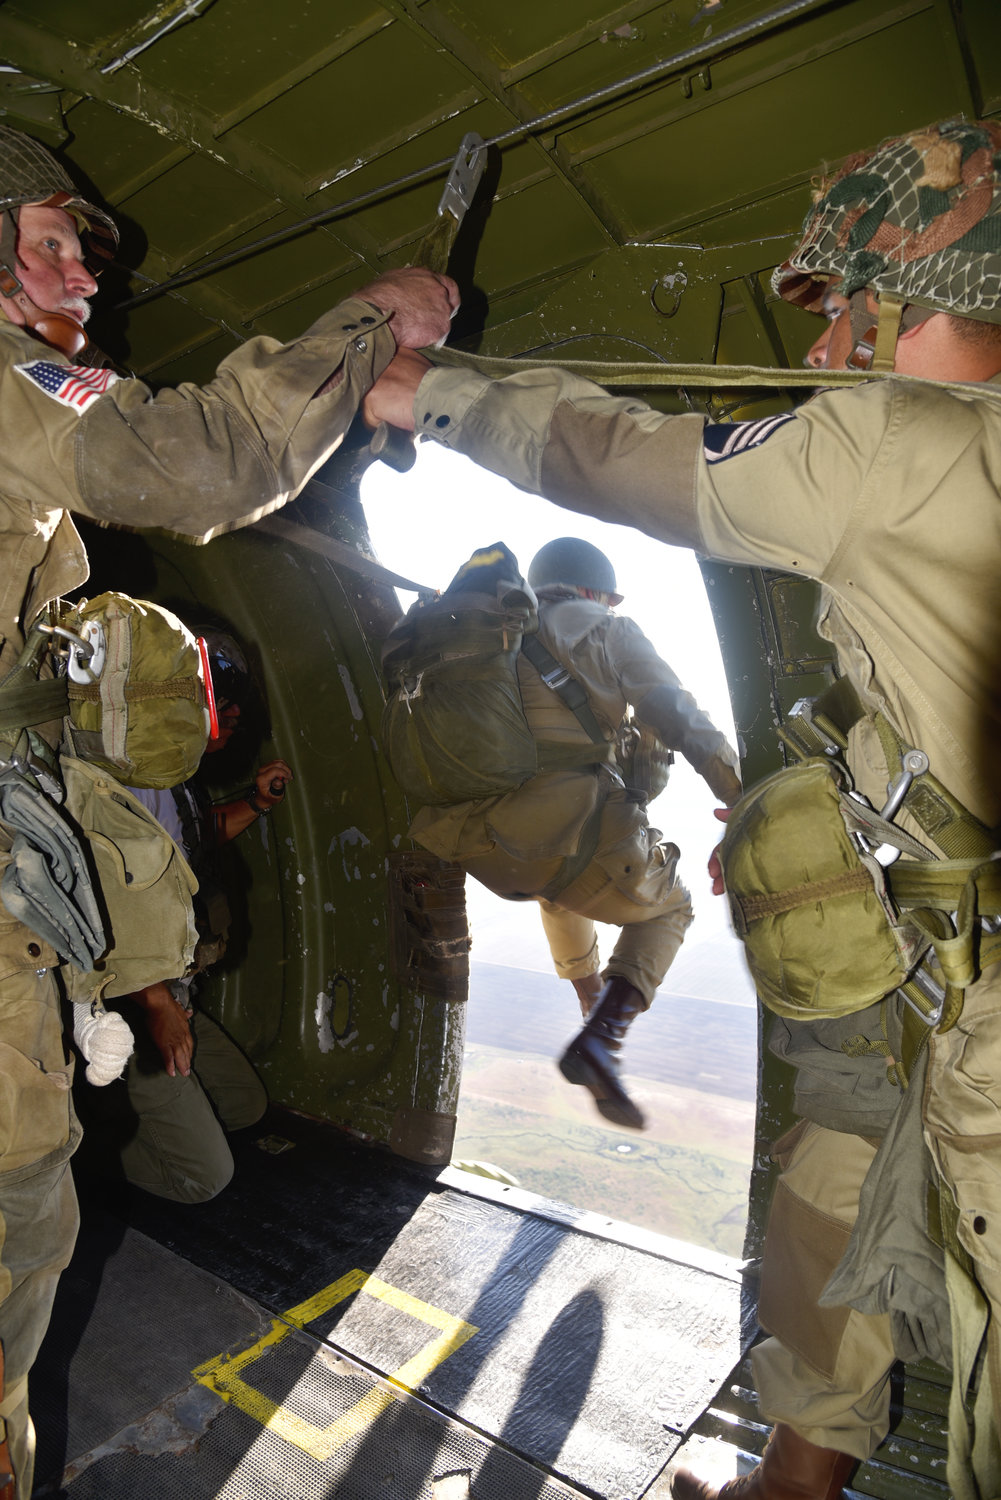 A member of the World War II Airborne Demonstration Team jumps from a World War II era C-47 called Boogie Baby. Another team member prepares to jump, while Jump Master Ken Larson keeps watch.